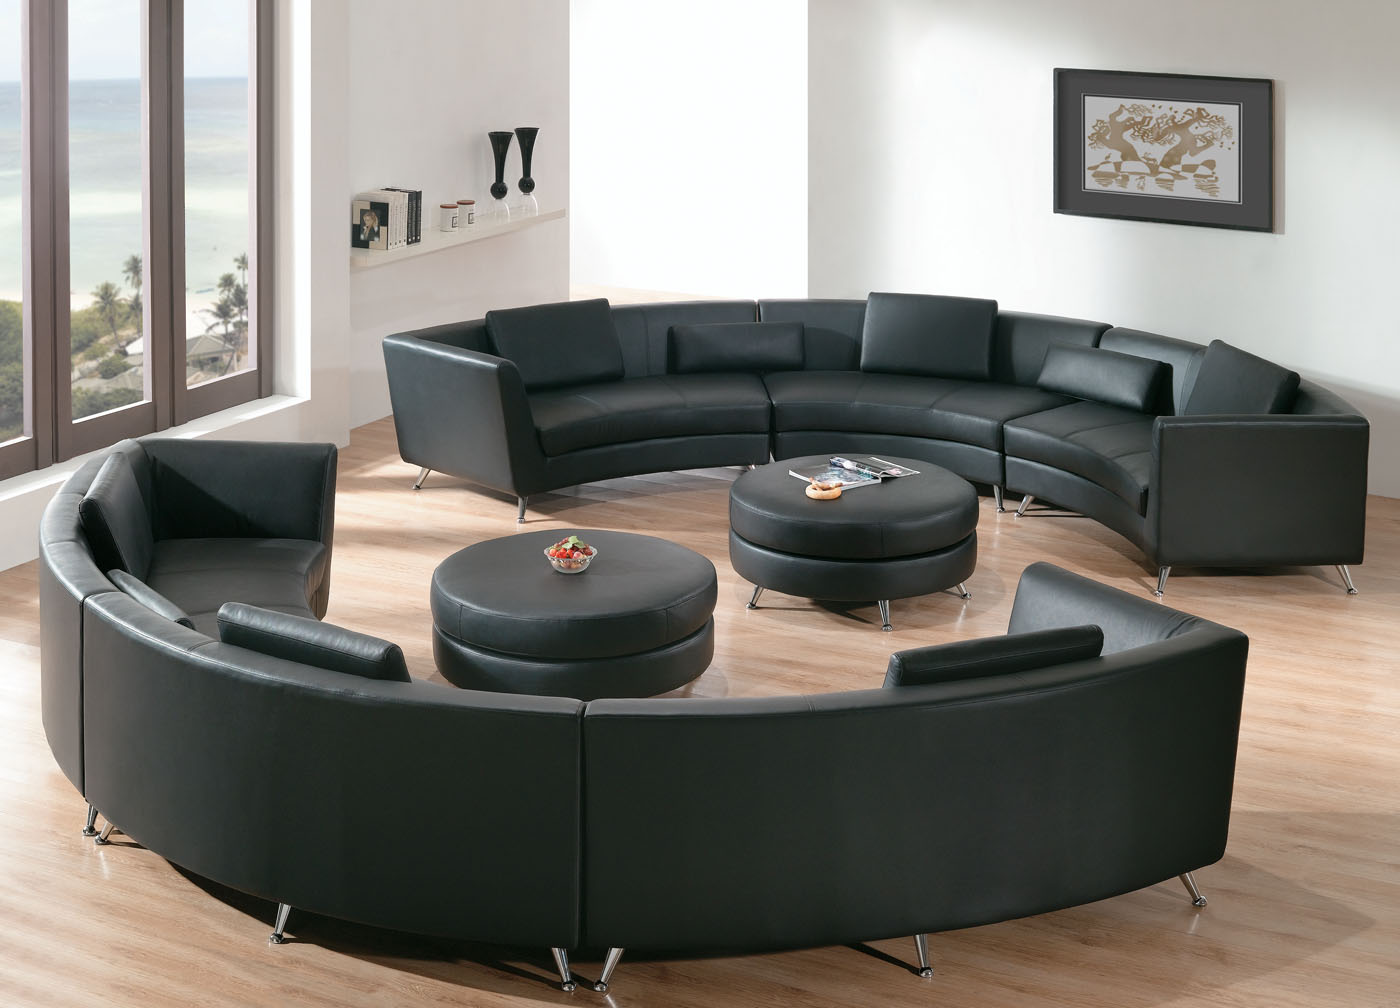 Awesome Soft Curved Leather Sofa with Wooden Floor for Welcoming ...